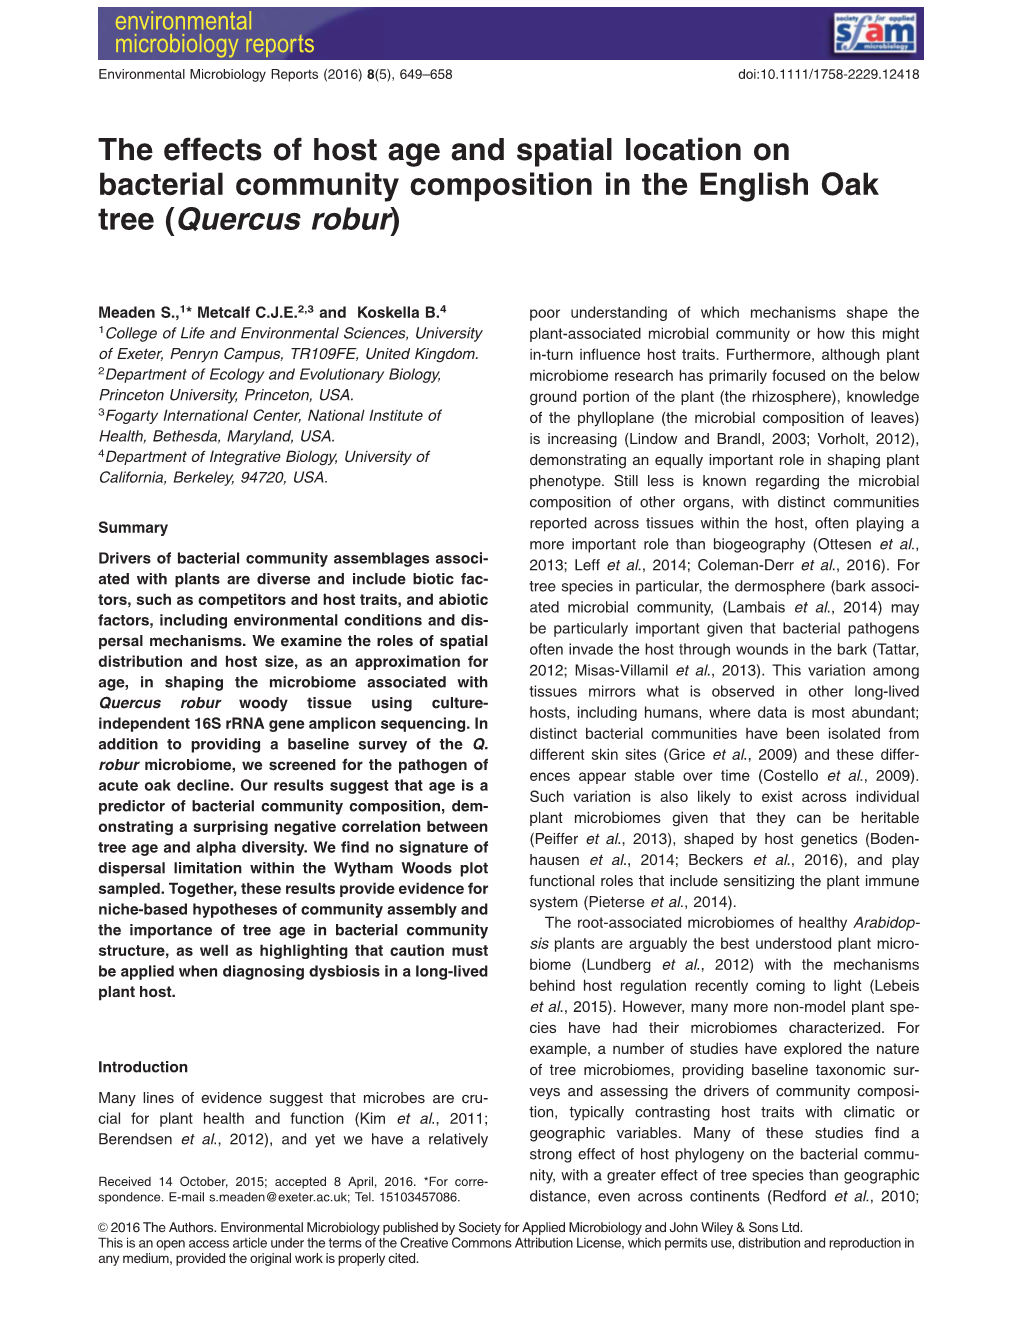 The Effects of Host Age and Spatial Location on Bacterial Community Composition in the English Oak Tree (Quercus Robur)